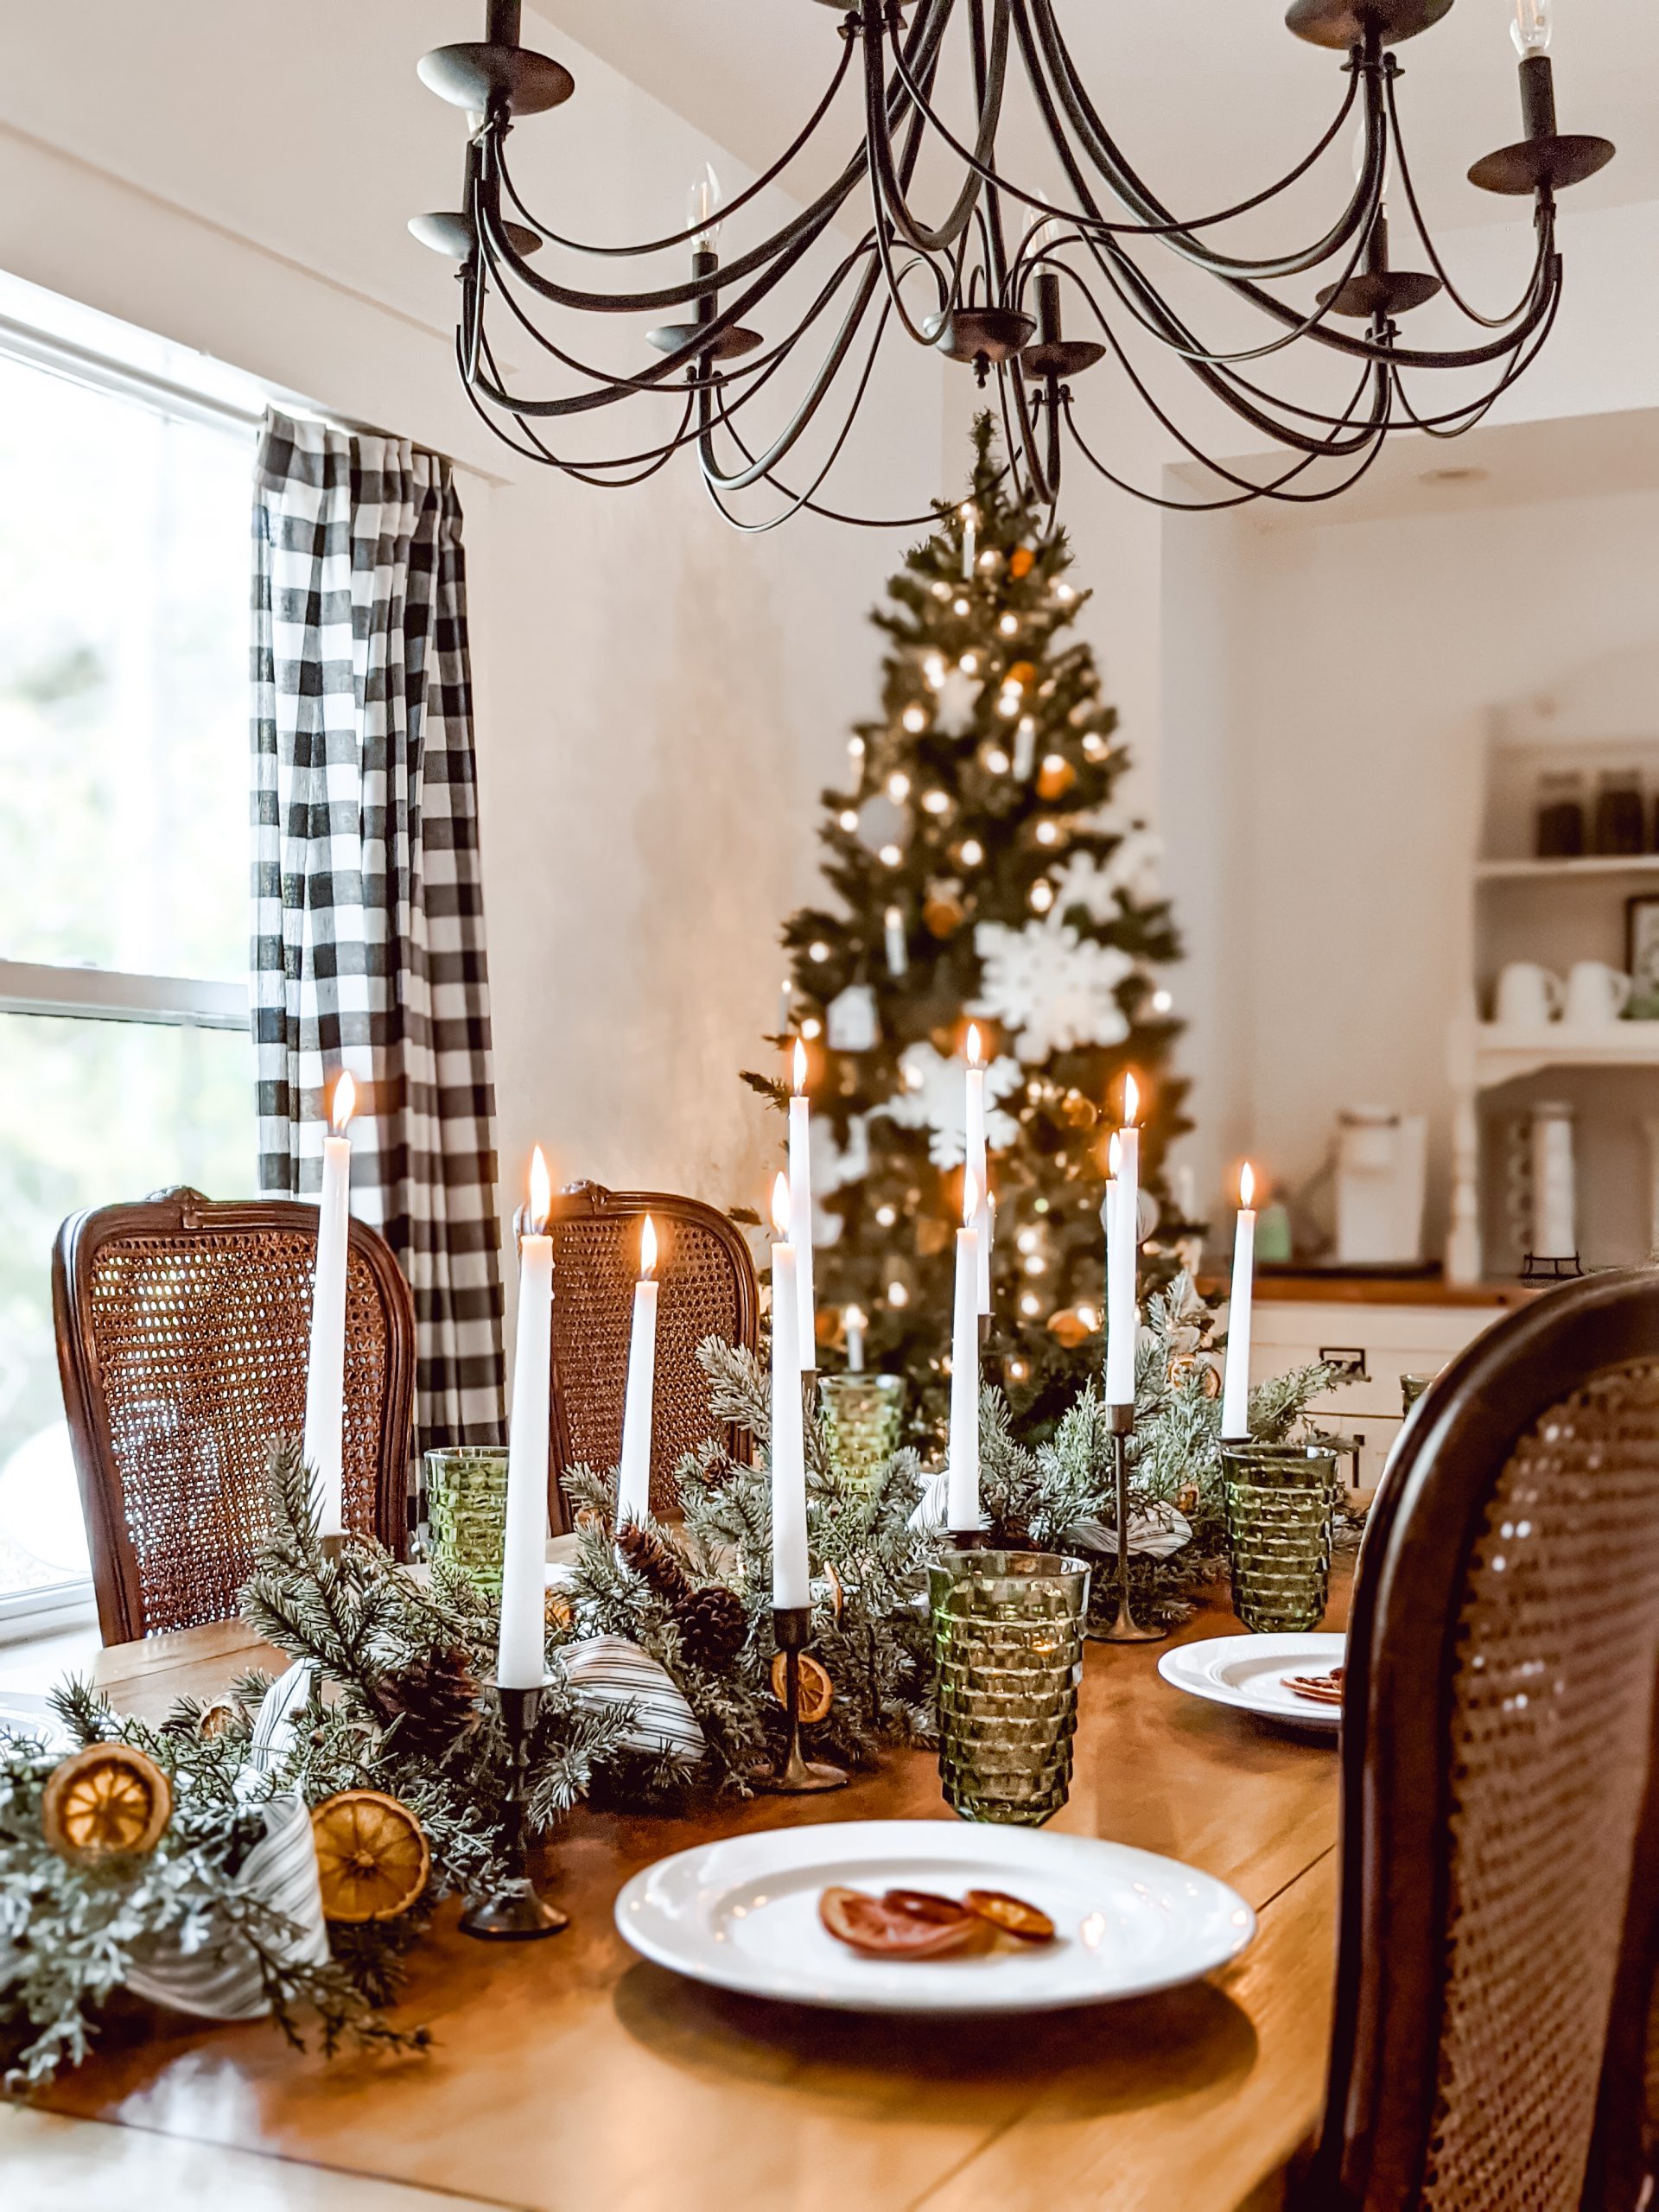 farmhouse cottage style dining room at Christmas time